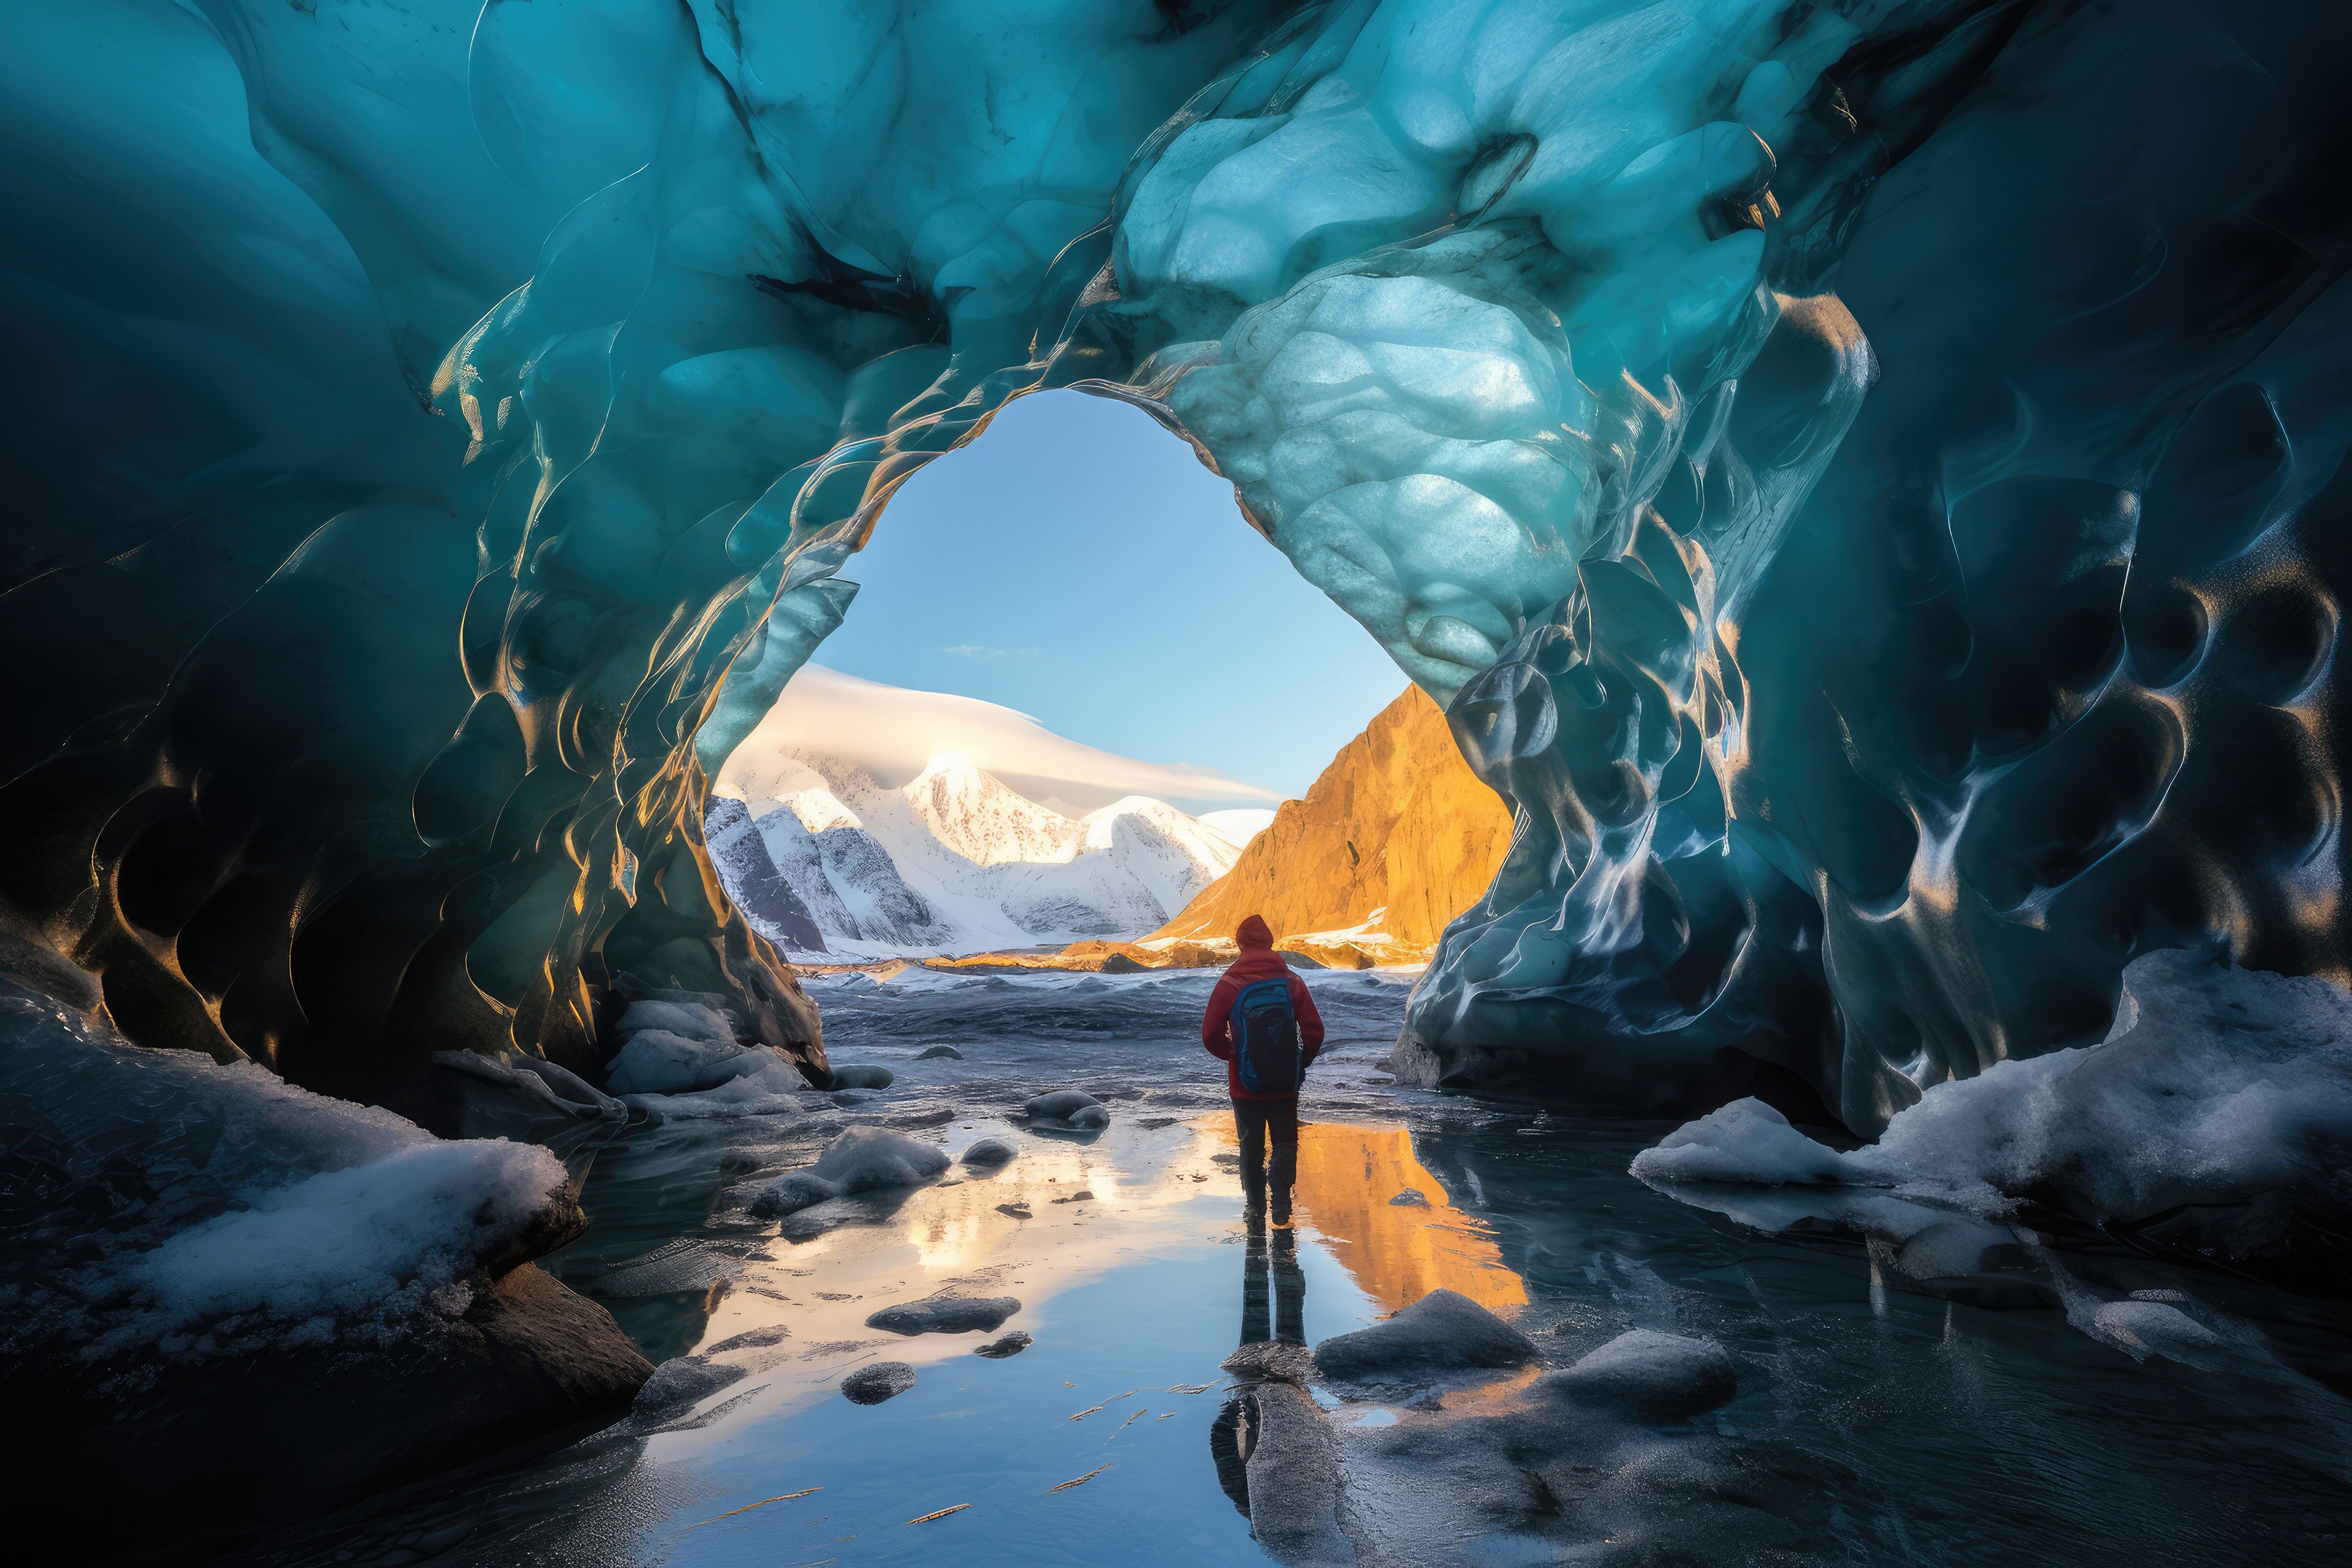 Exploring ice caves in Iceland in March, dress warmly with more daylight